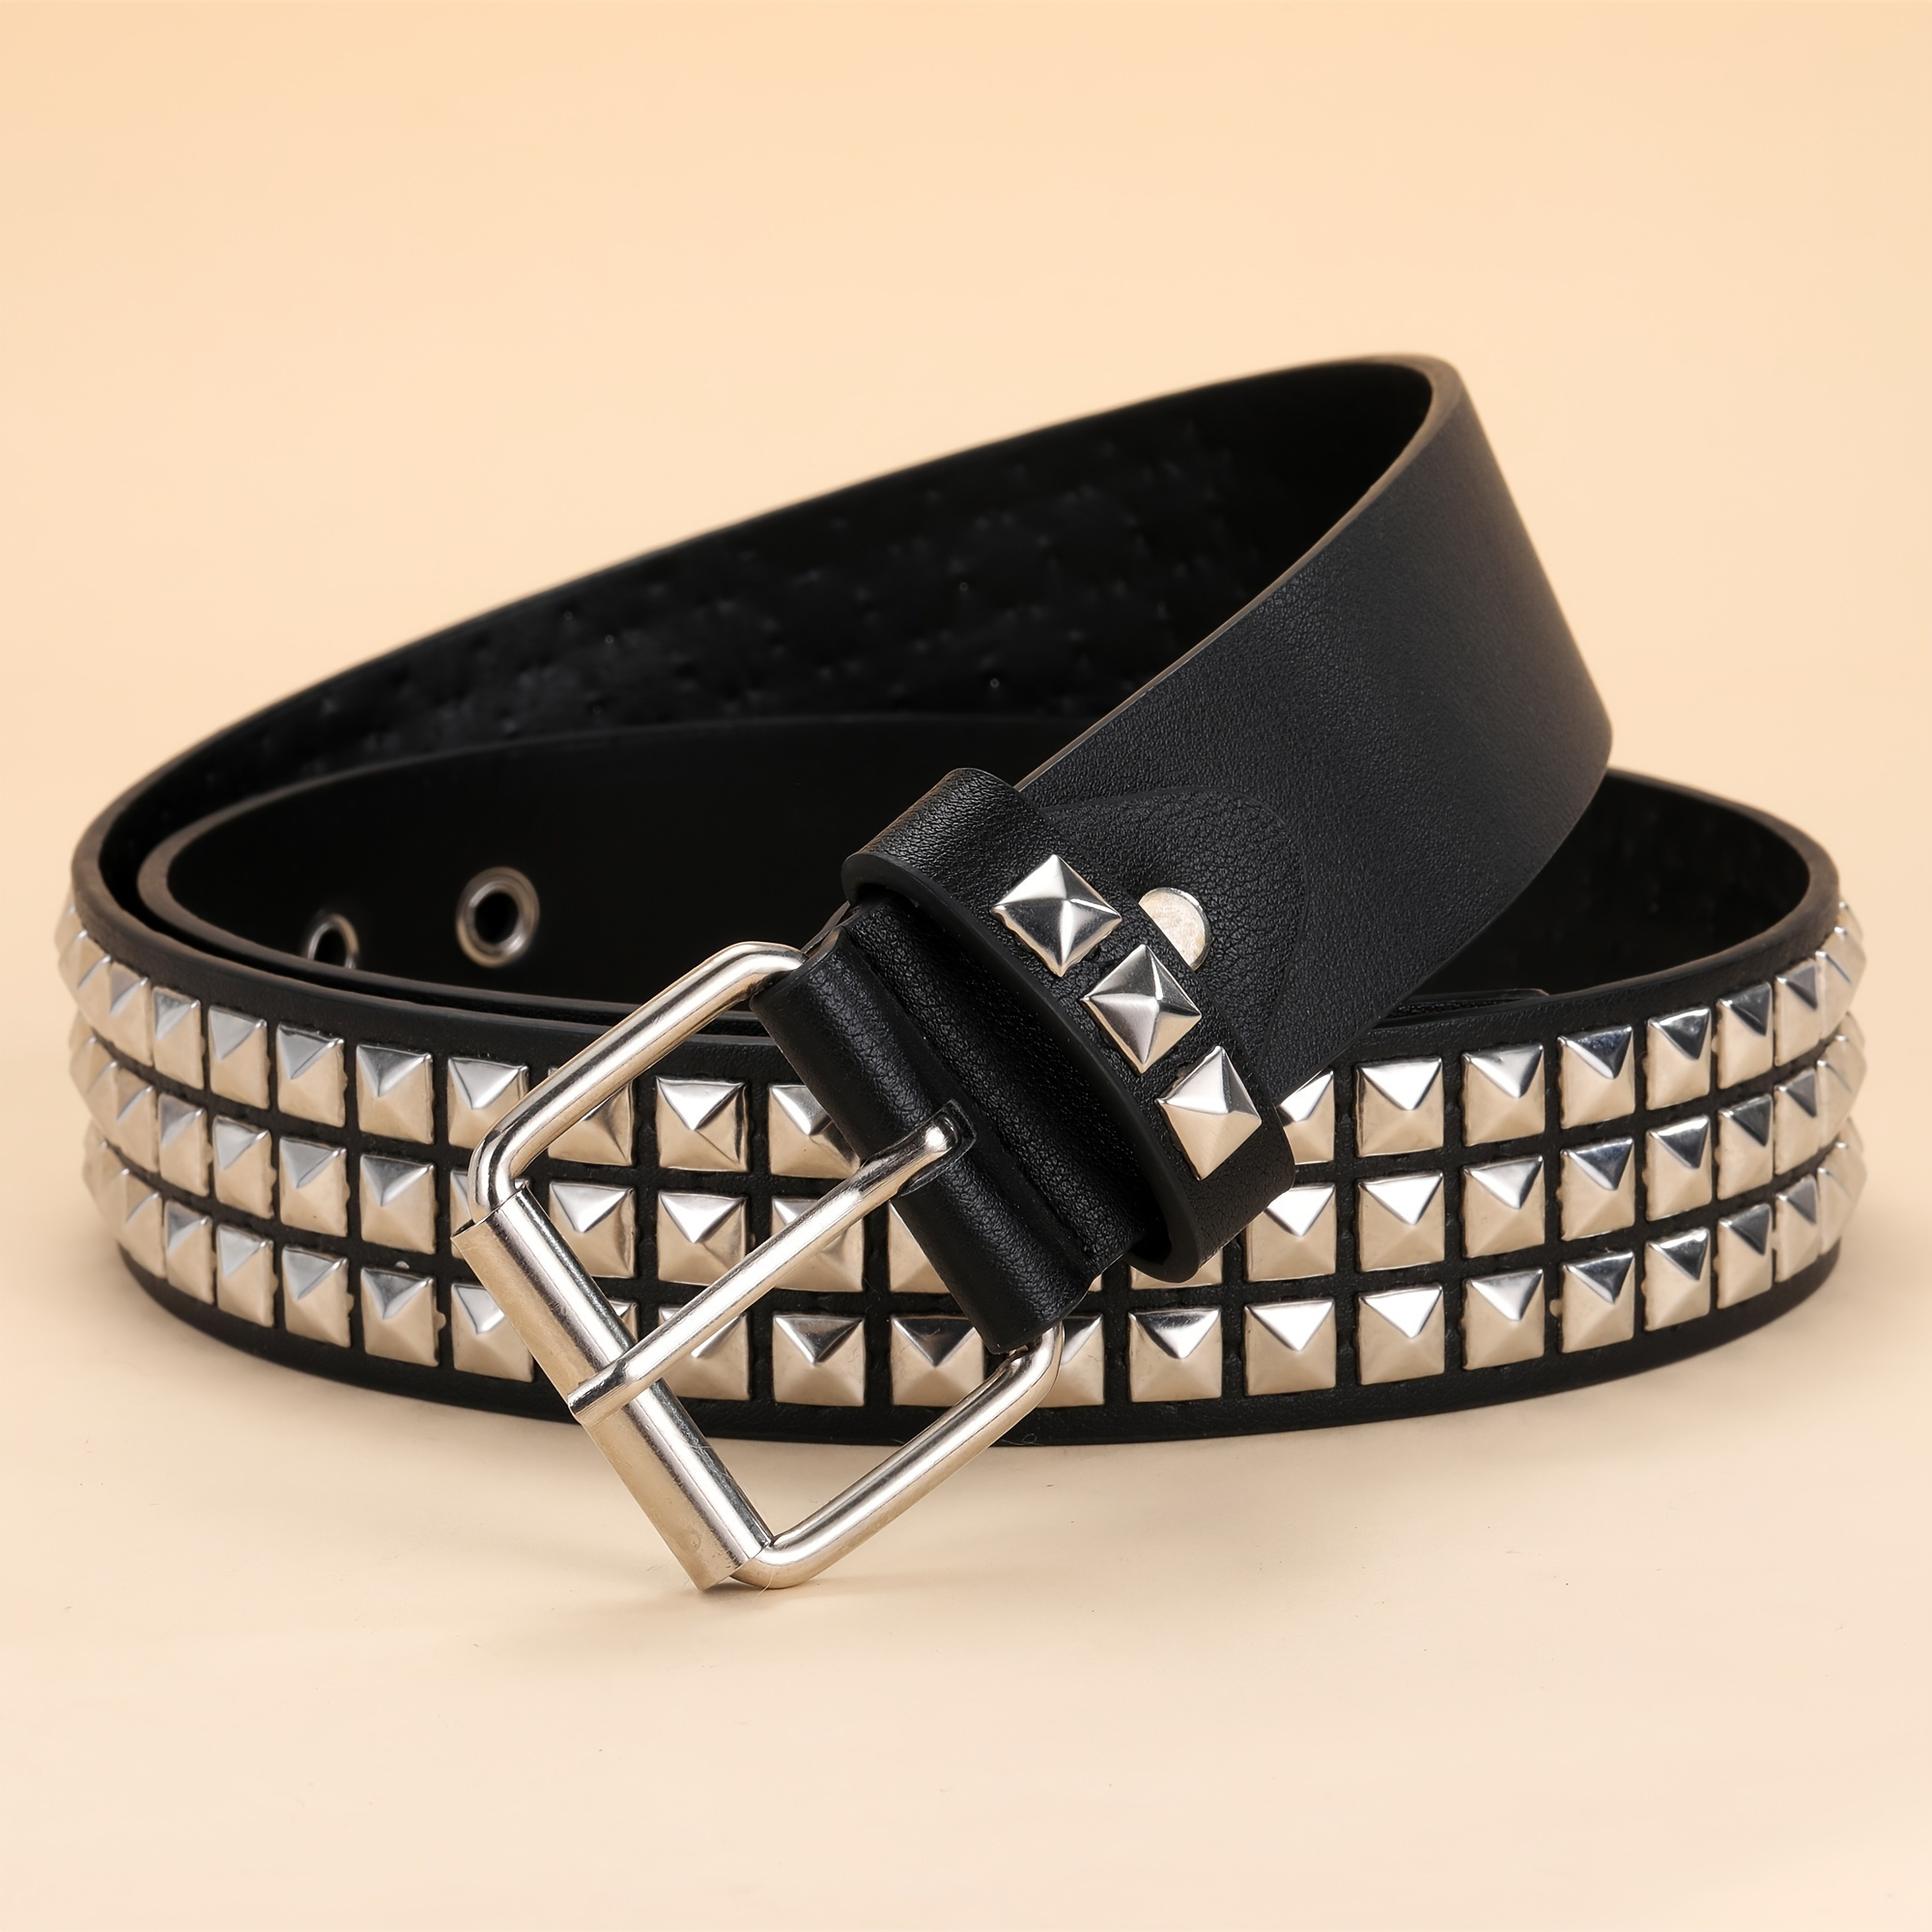 Hollow Bullet Decoration Belt Fashion Ladies Leather Studded Gift